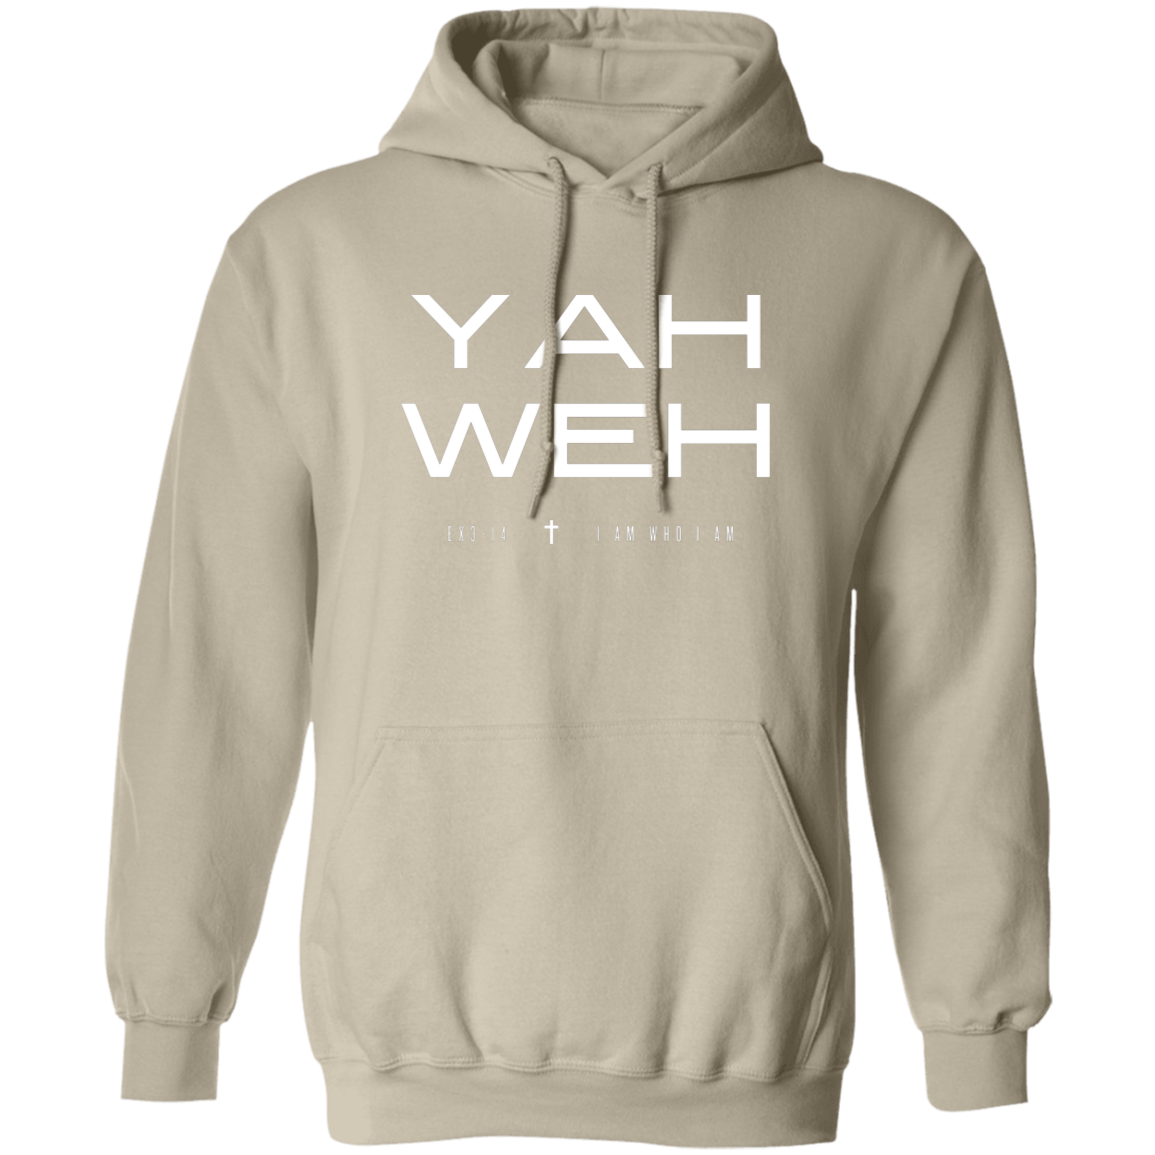 YAHWEH | WHITE TEXT | Pullover Hoodie